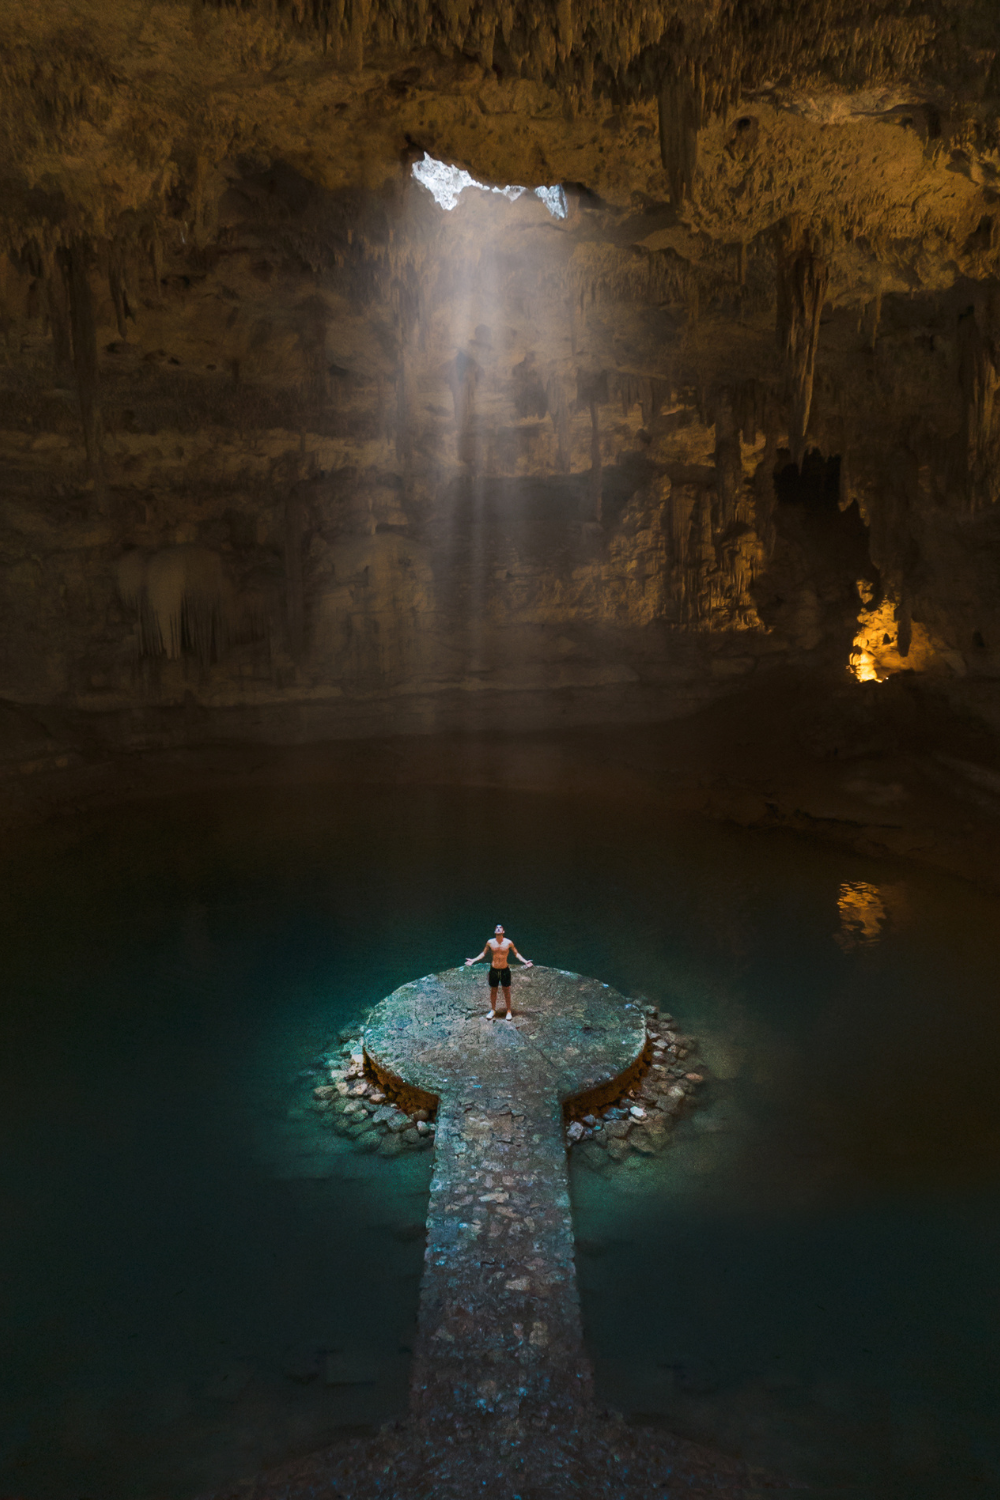 Man standing on stone landing in large cave under opening with water all around and light shinning through